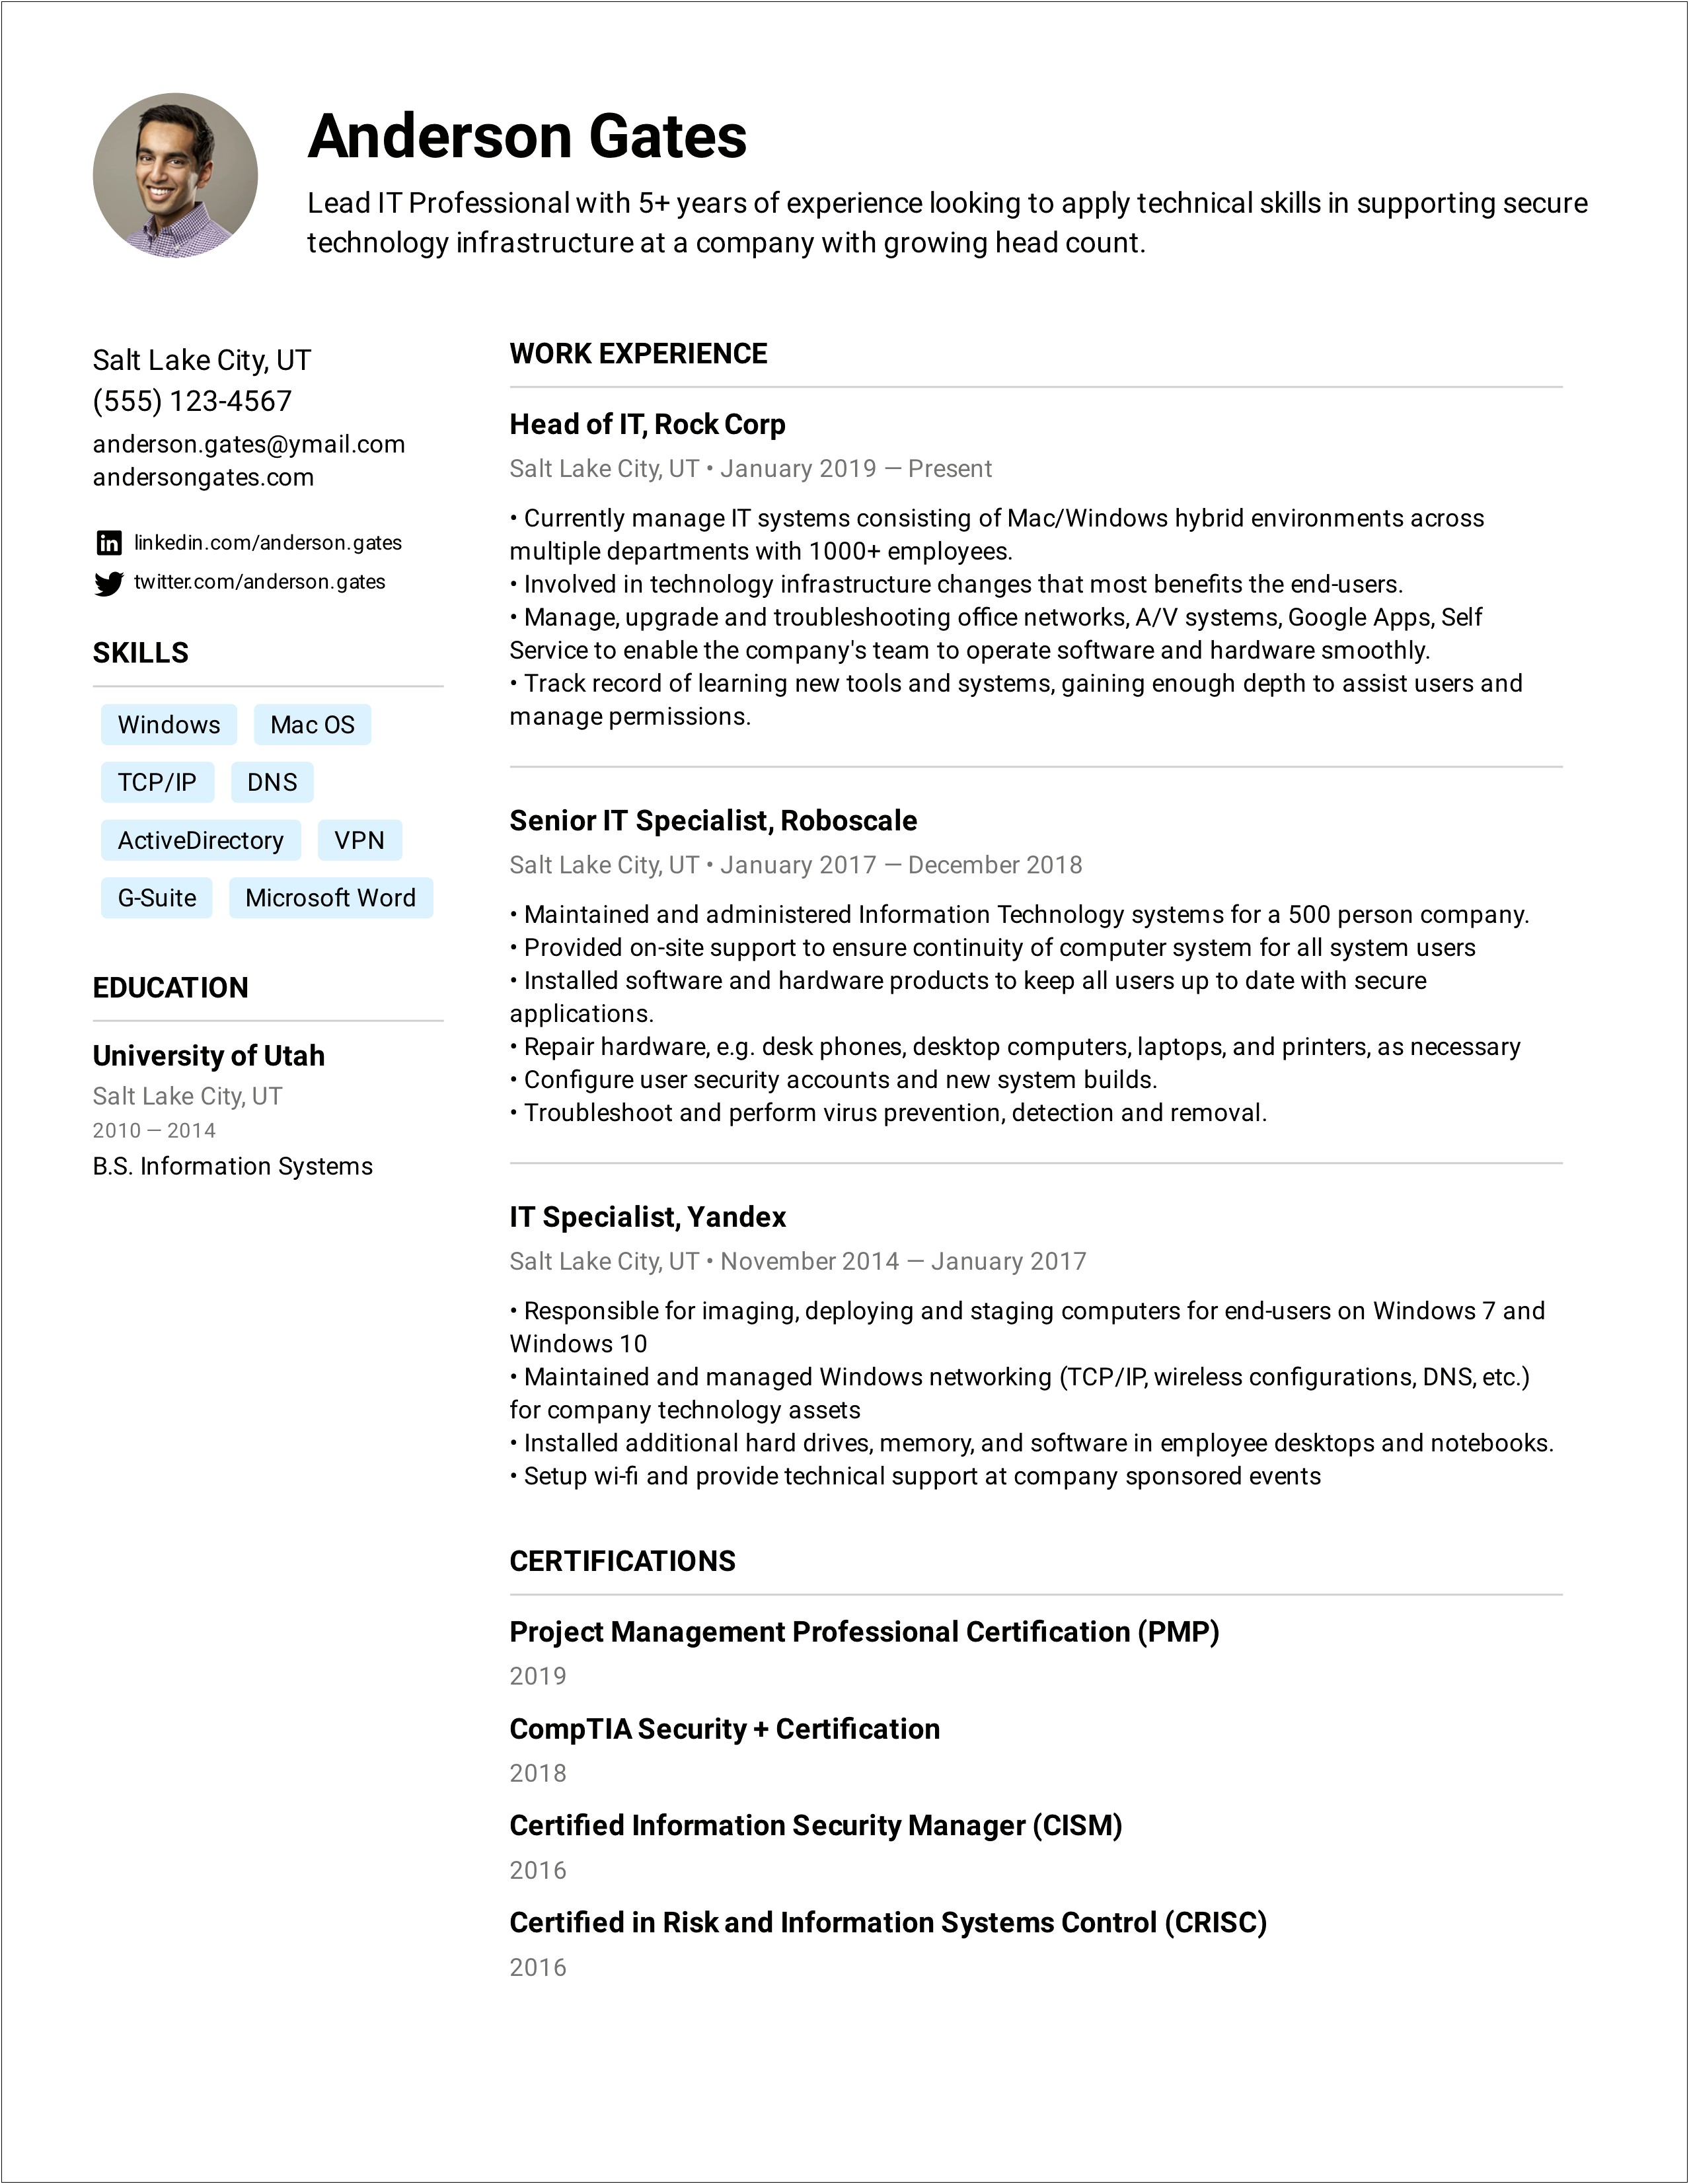 Hotel Security Manager Resume Examples